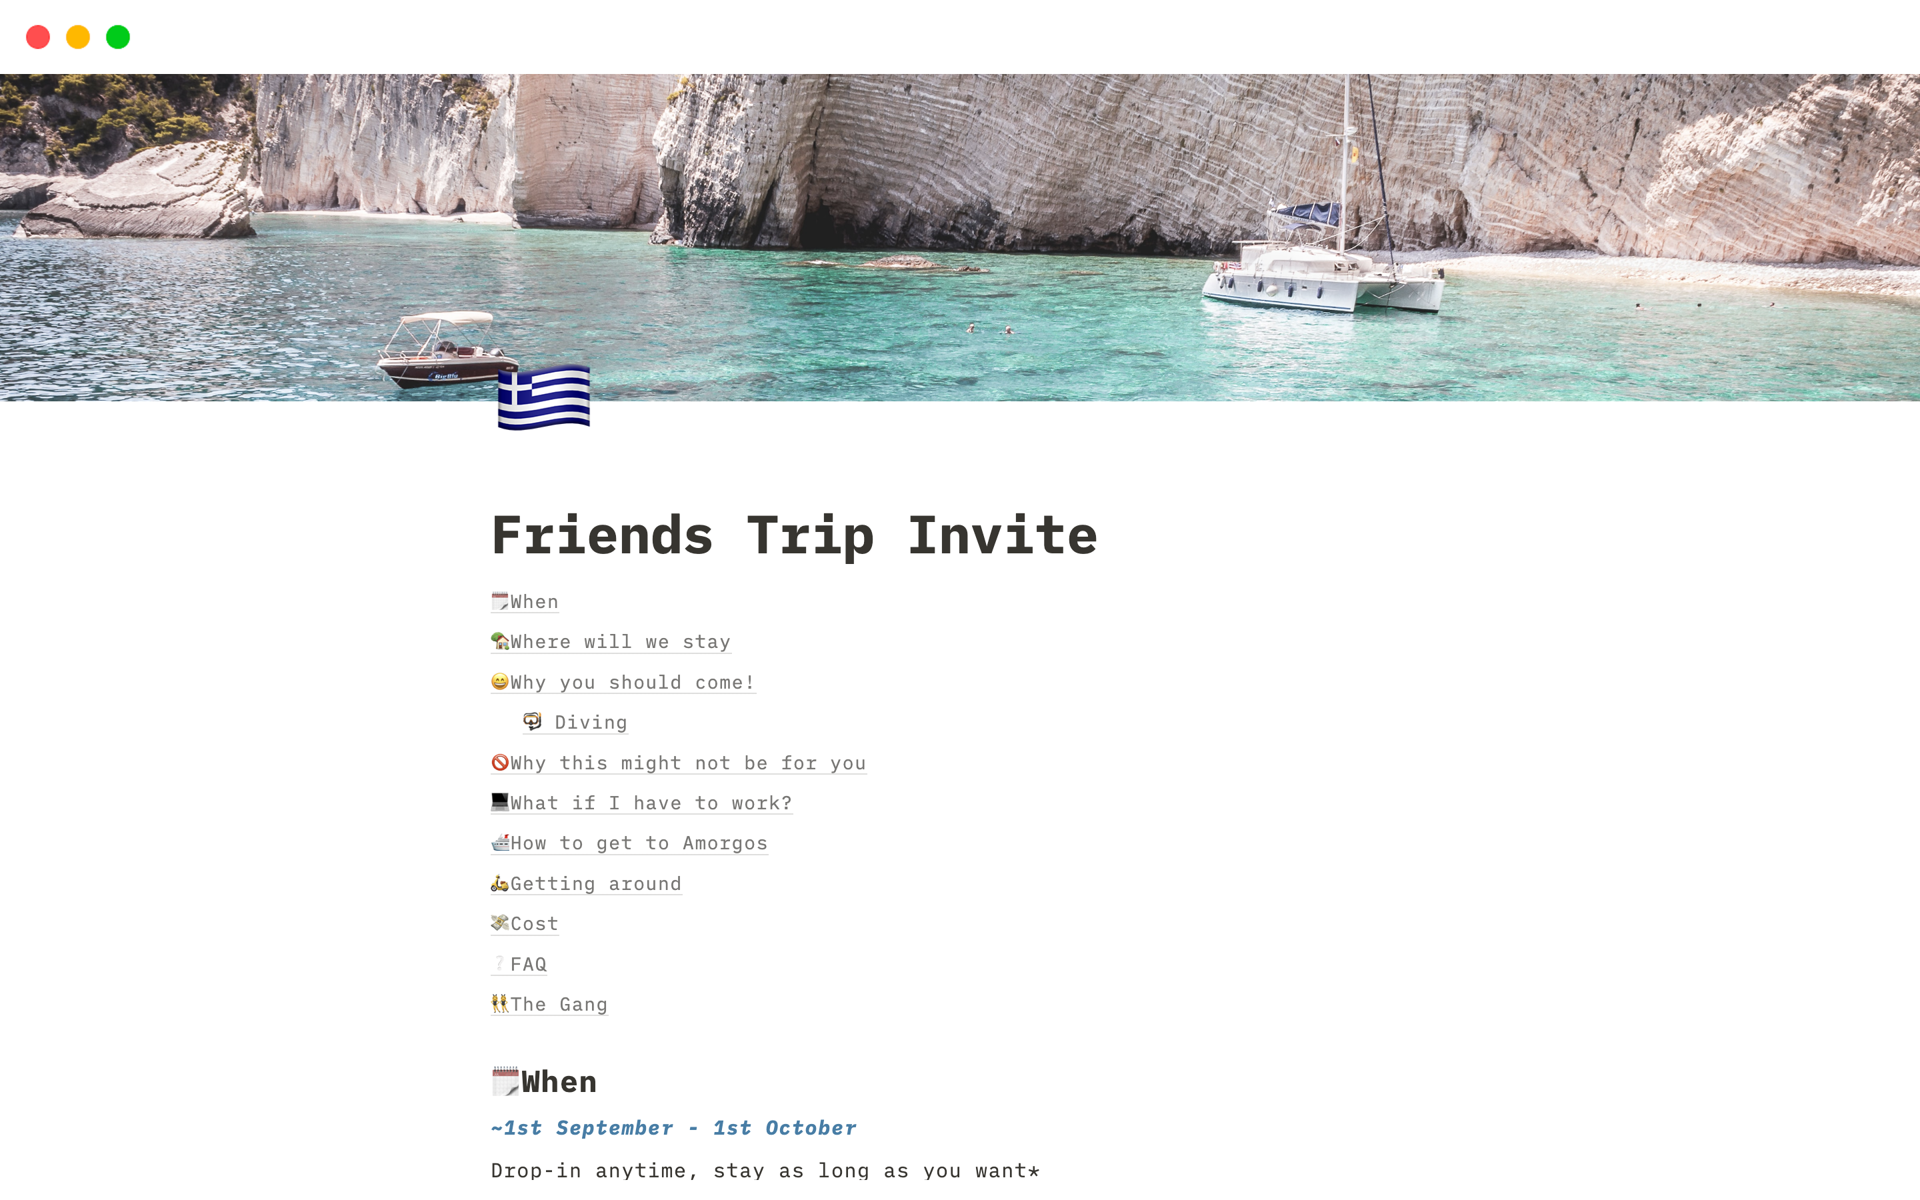 Invite for friends to join an epic trip